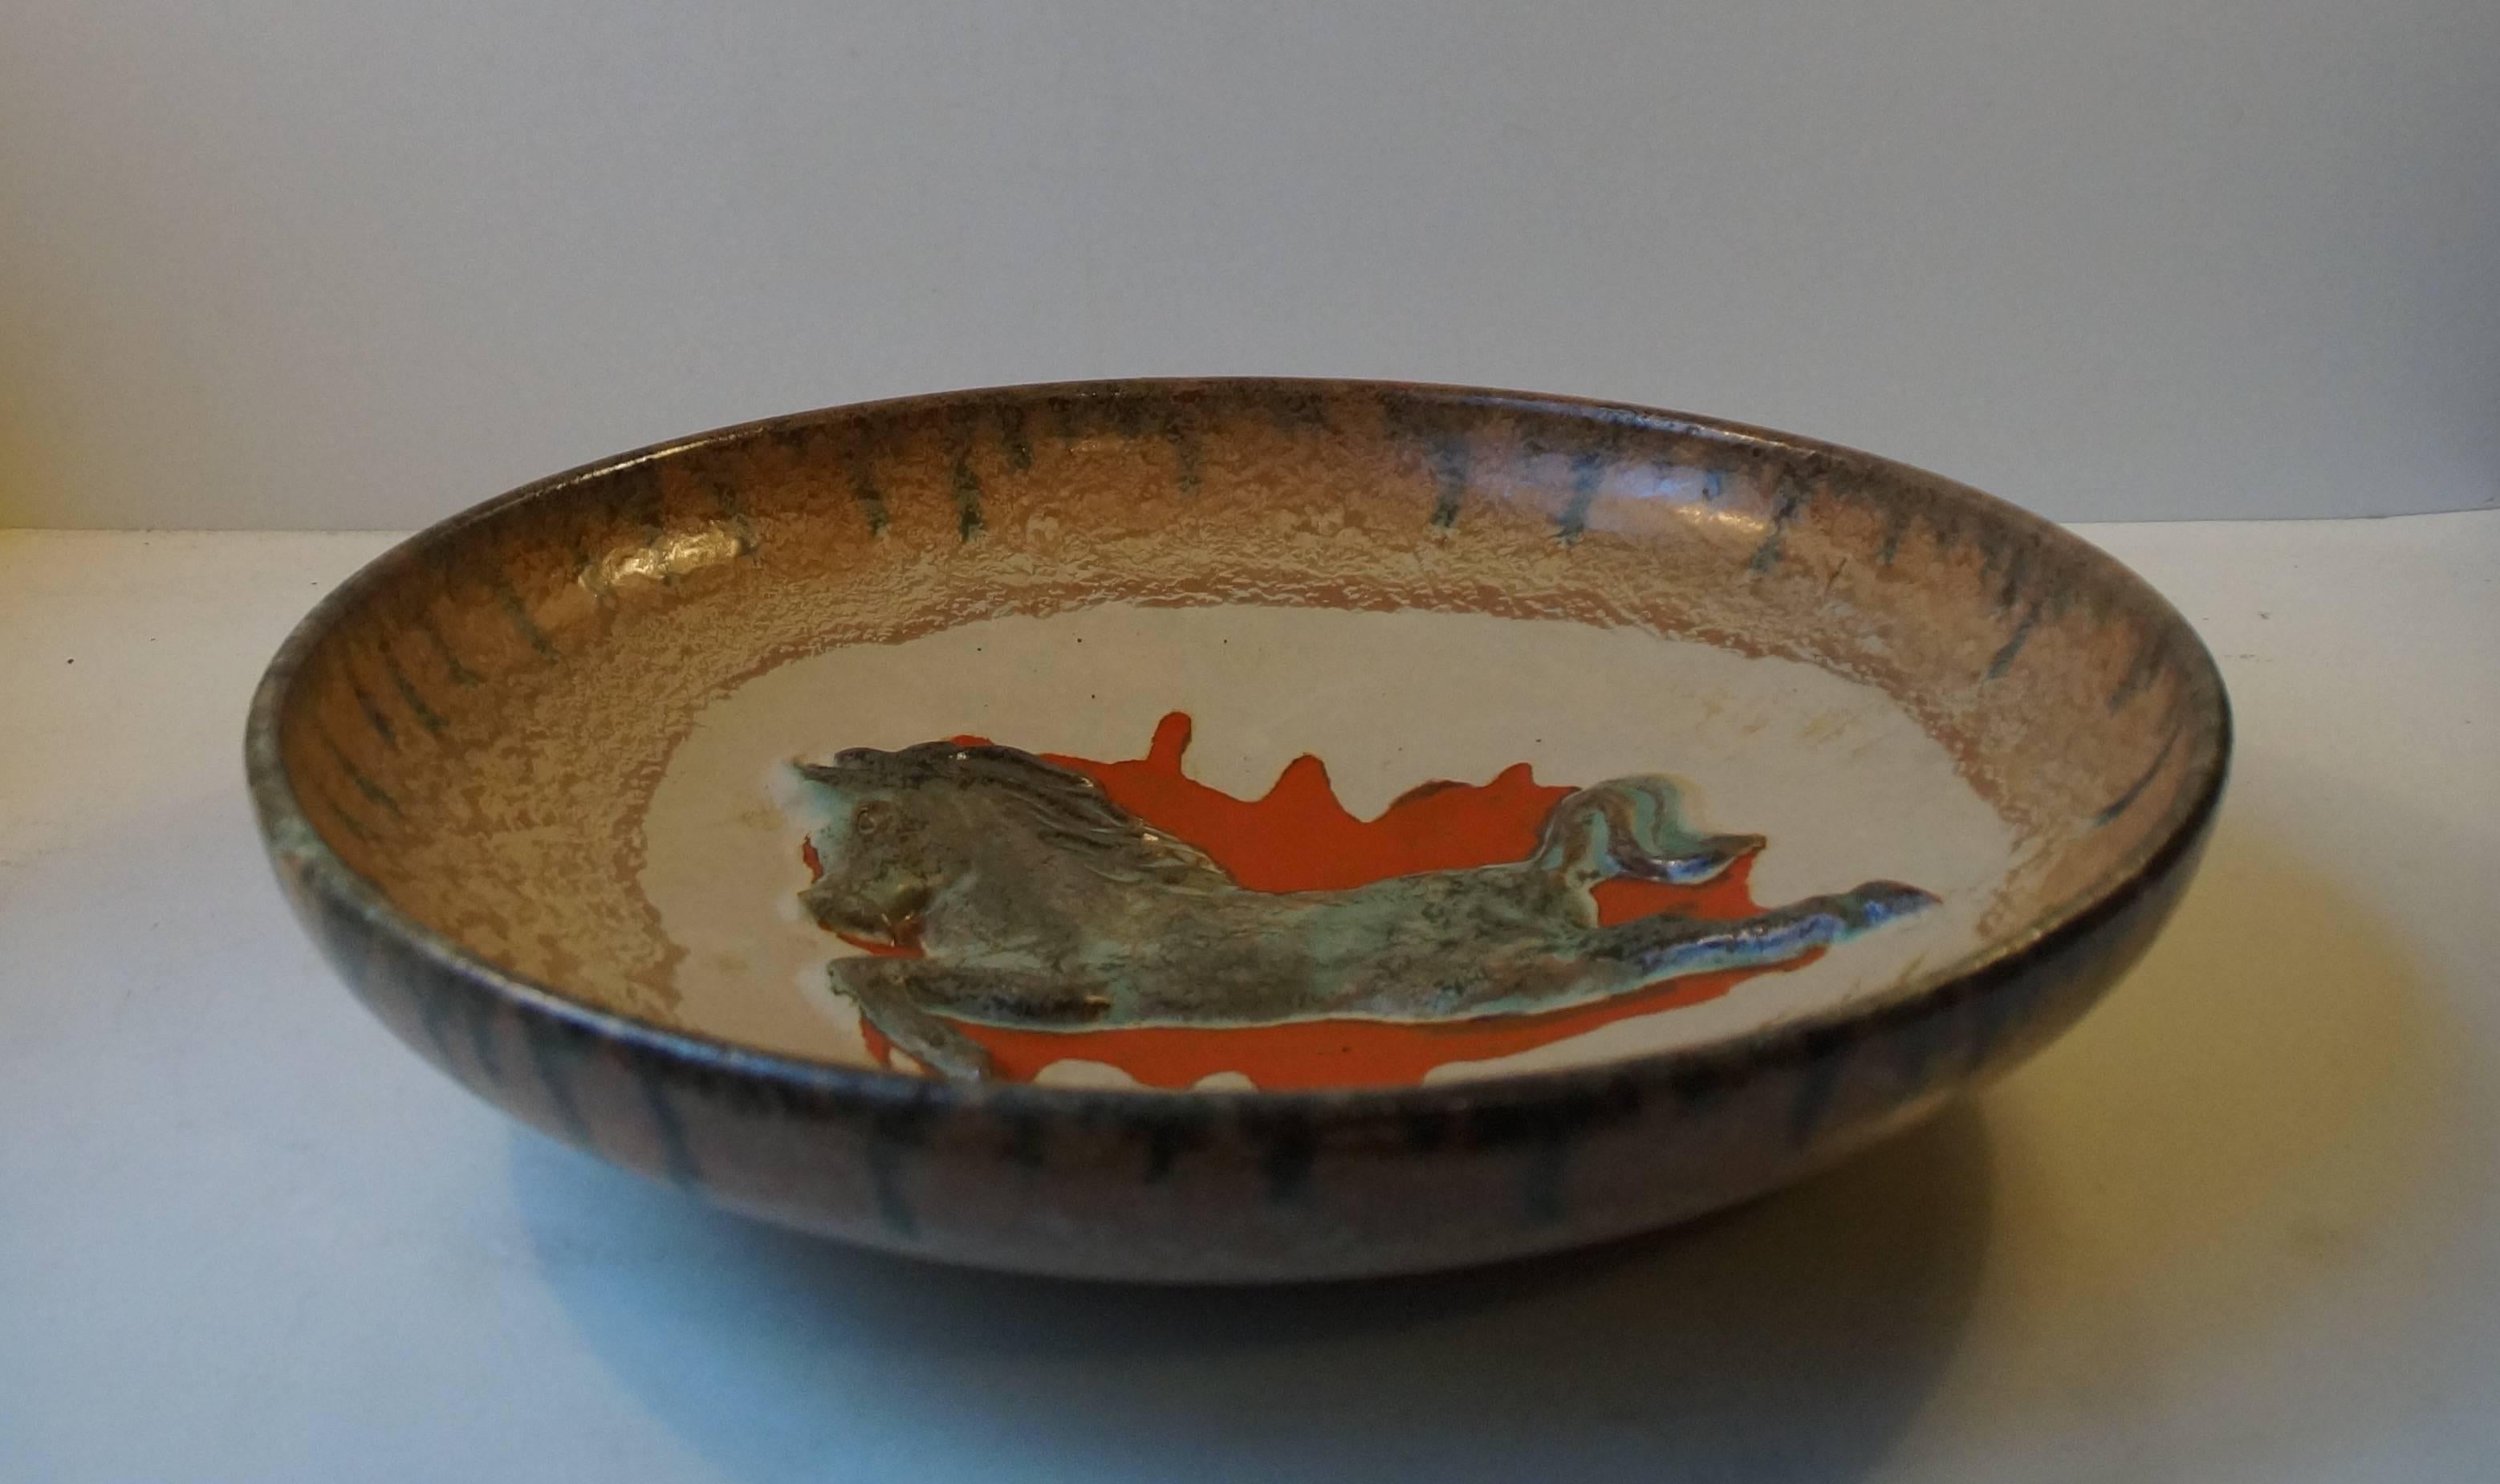 Glazed Unusual Mid-Century Stoneware Centrepiece 'Horse' Bowl by John Anderson Hoganas For Sale